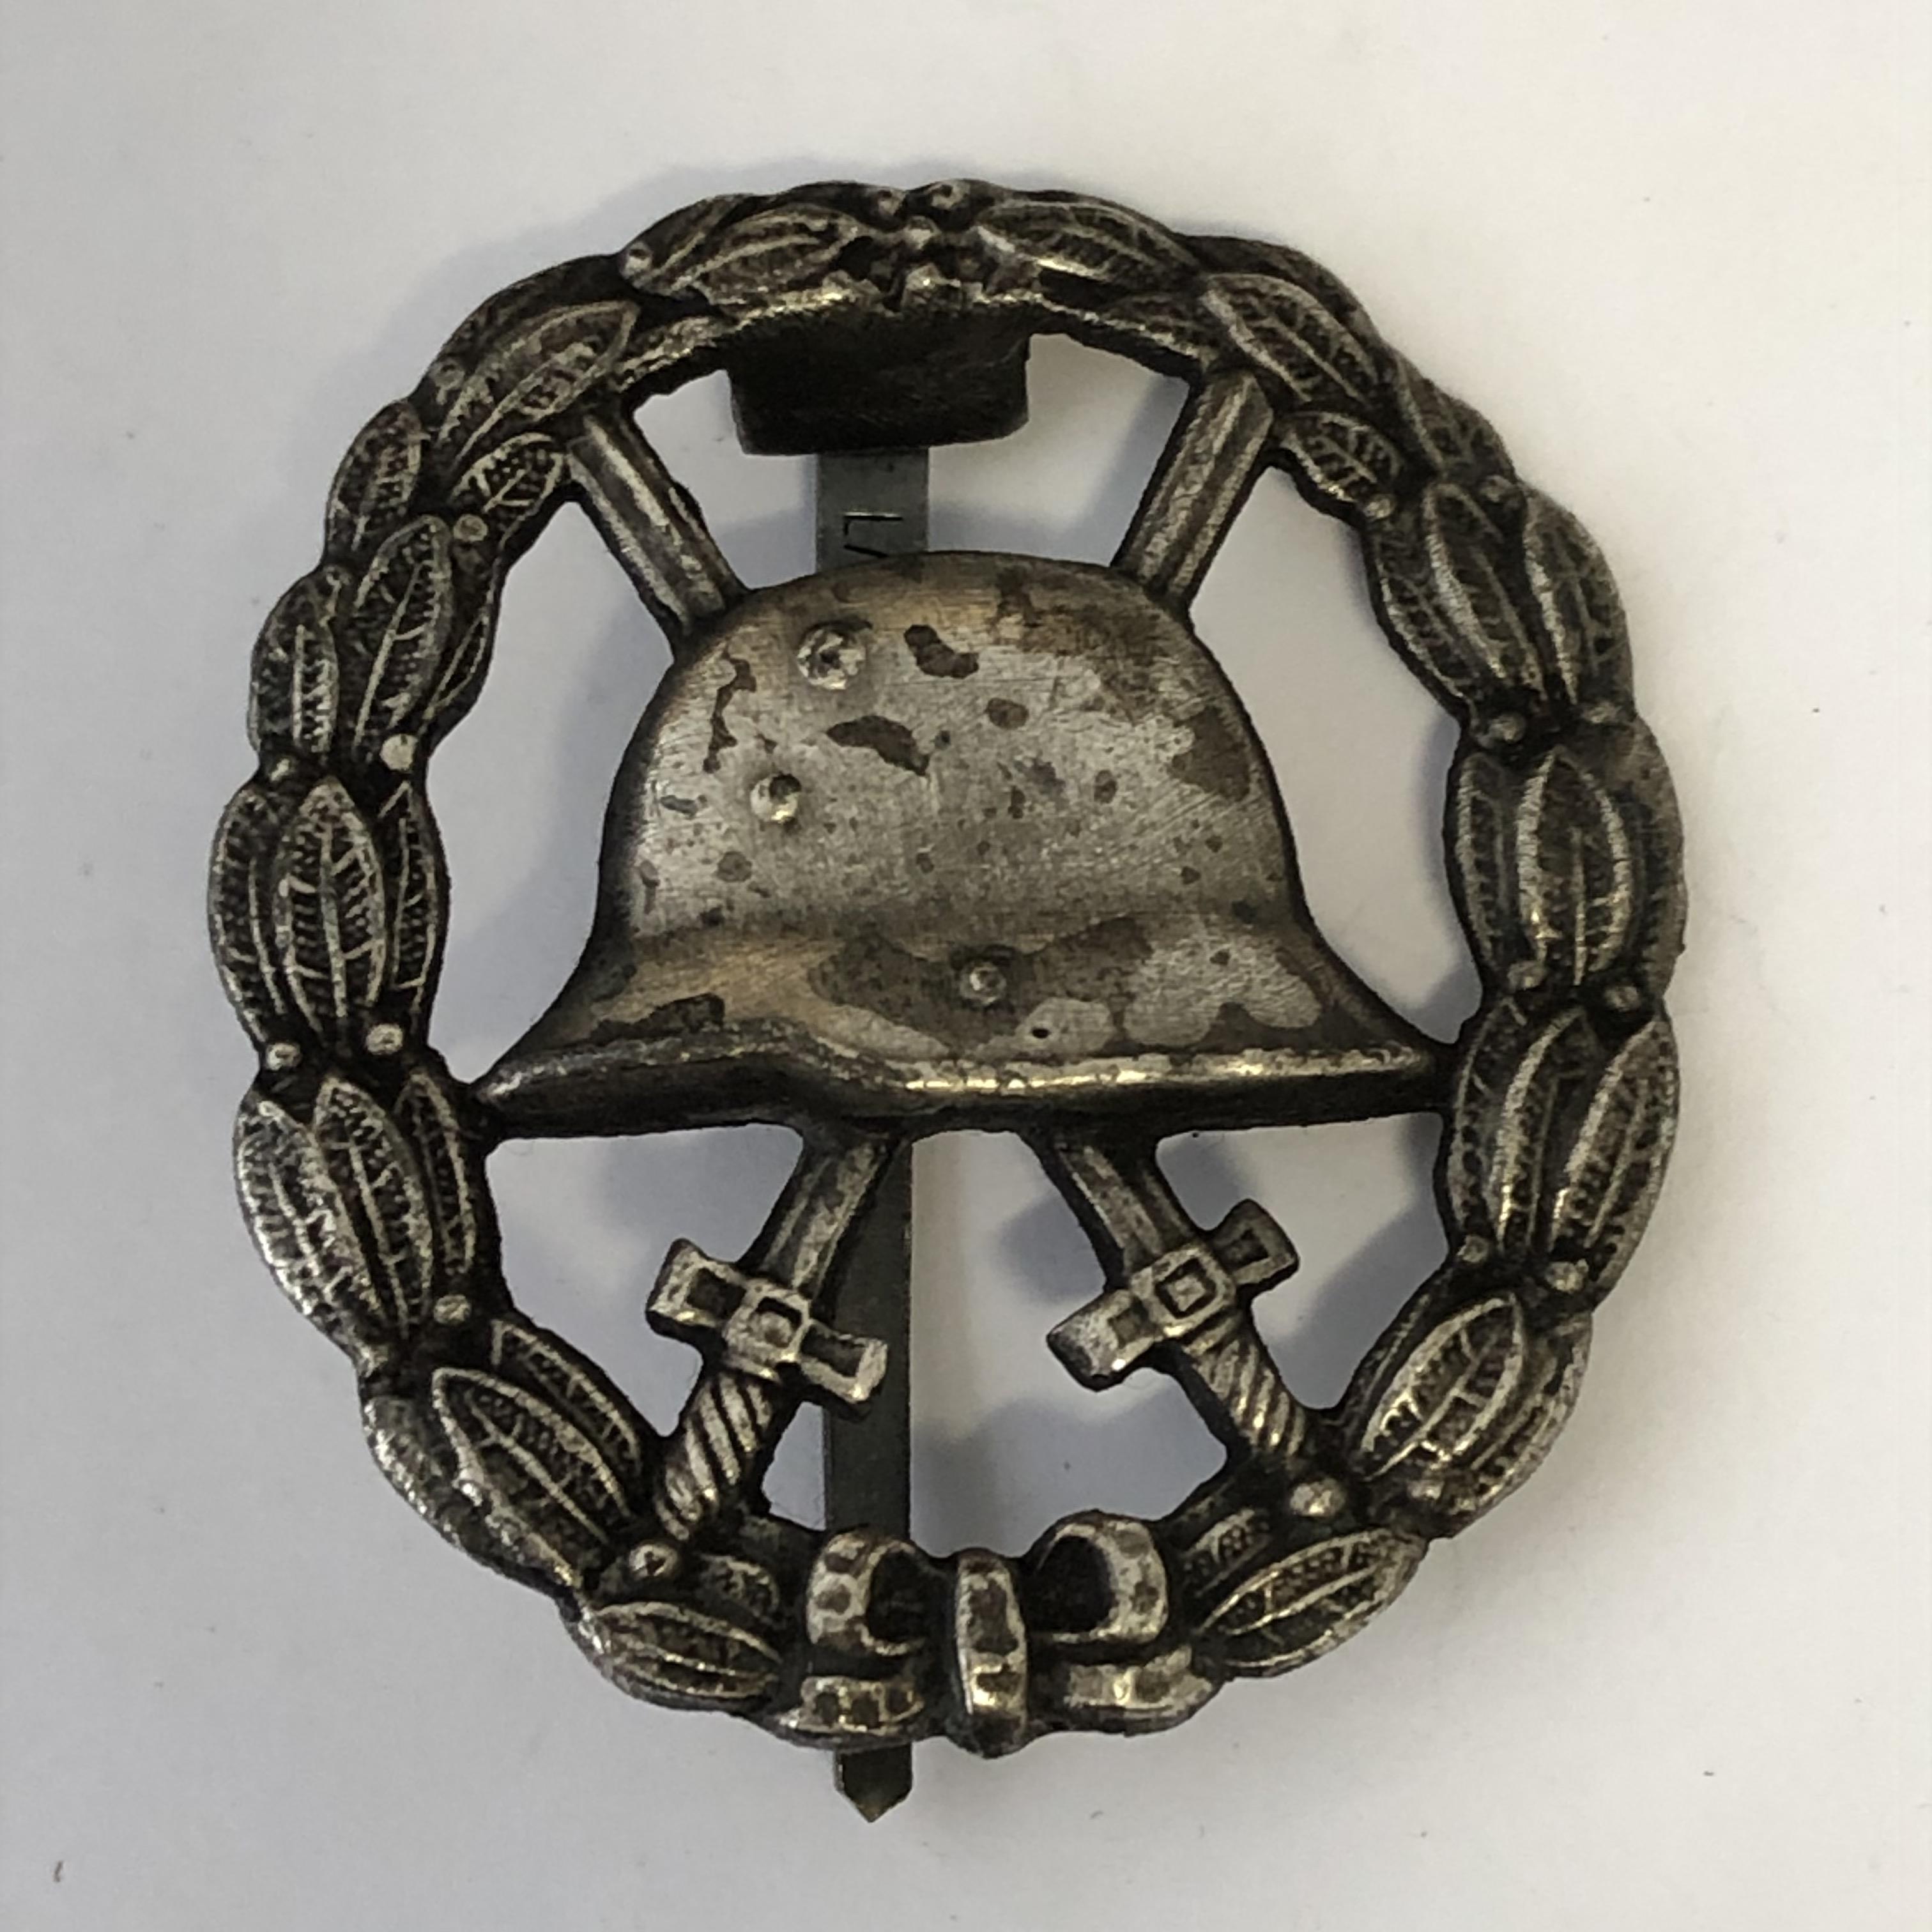 WWII GERMAN NOD ASSAULT BADGE 25ENGAGEMENTS-WWI GERMAN SILVER WOUND BADGE MARKED L12 AND DESTROYER - Image 7 of 8